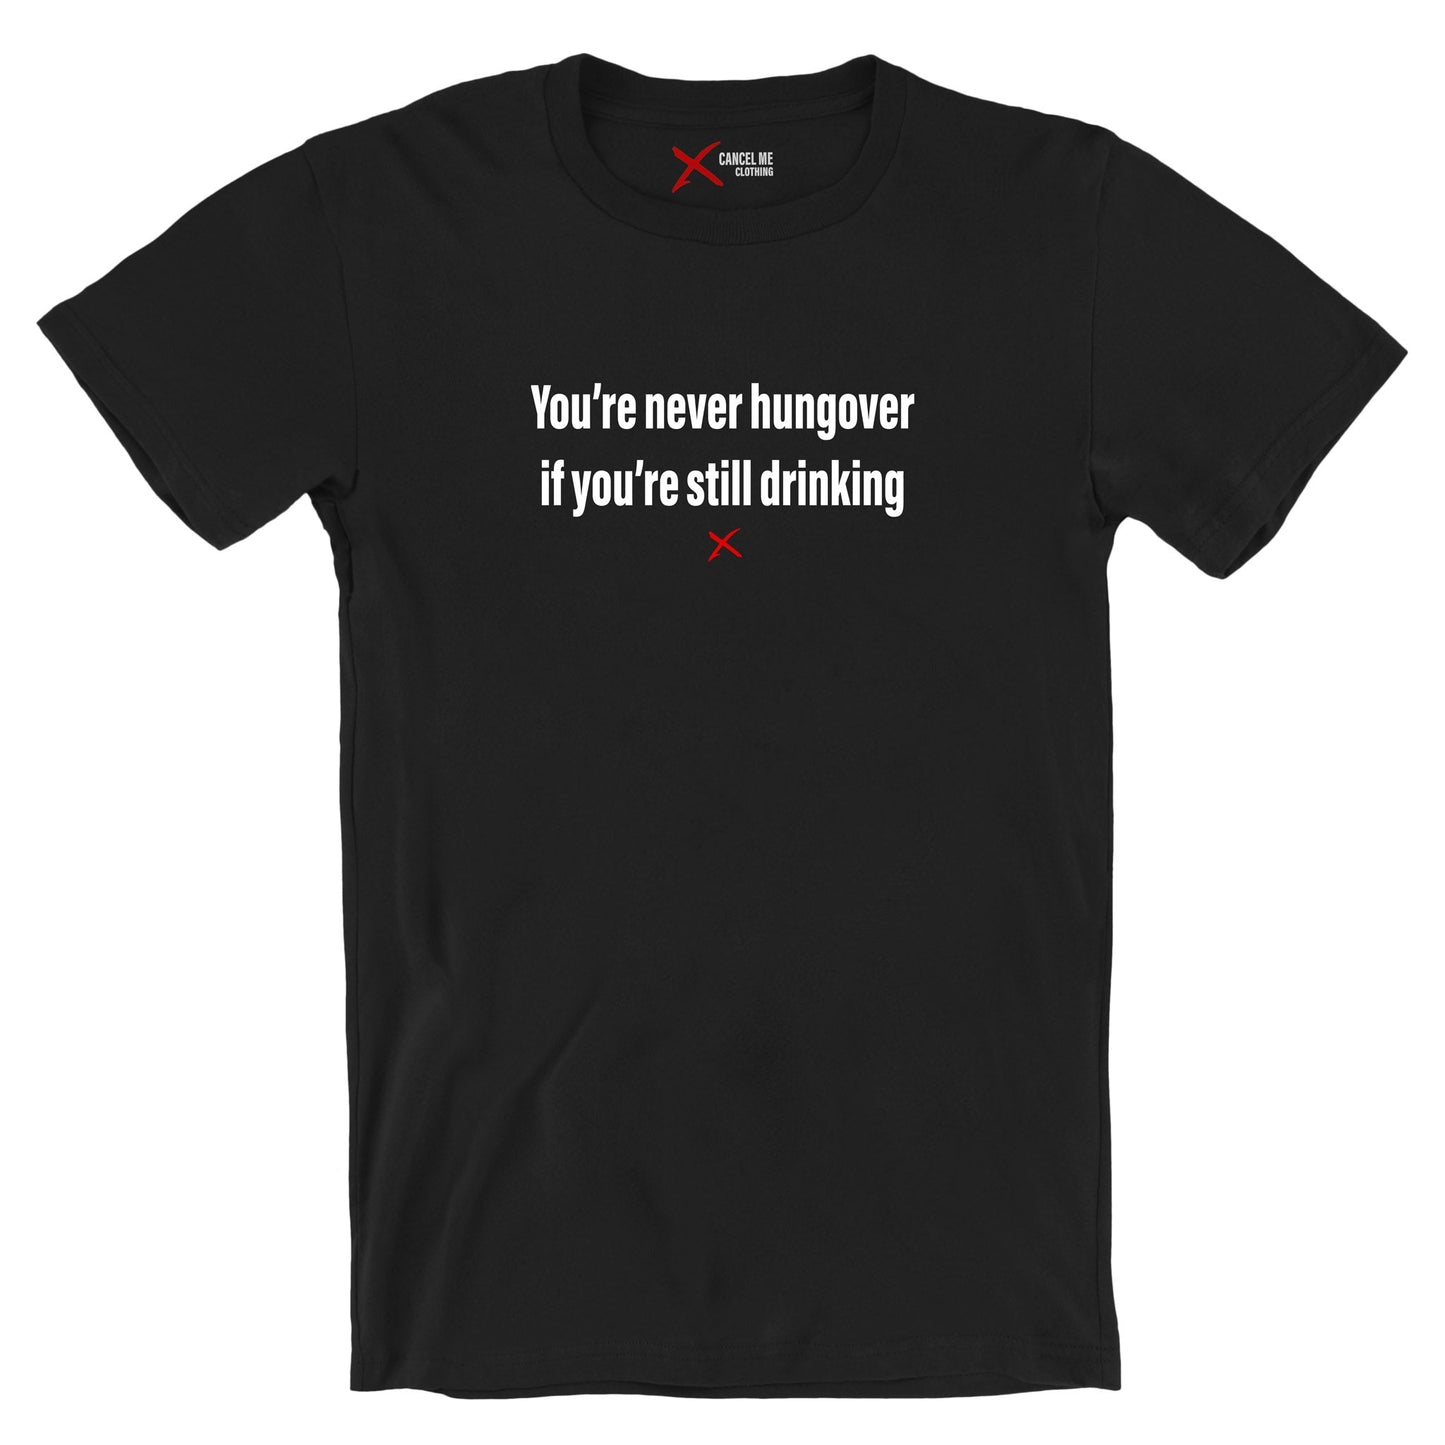 You're never hungover if you're still drinking - Shirt